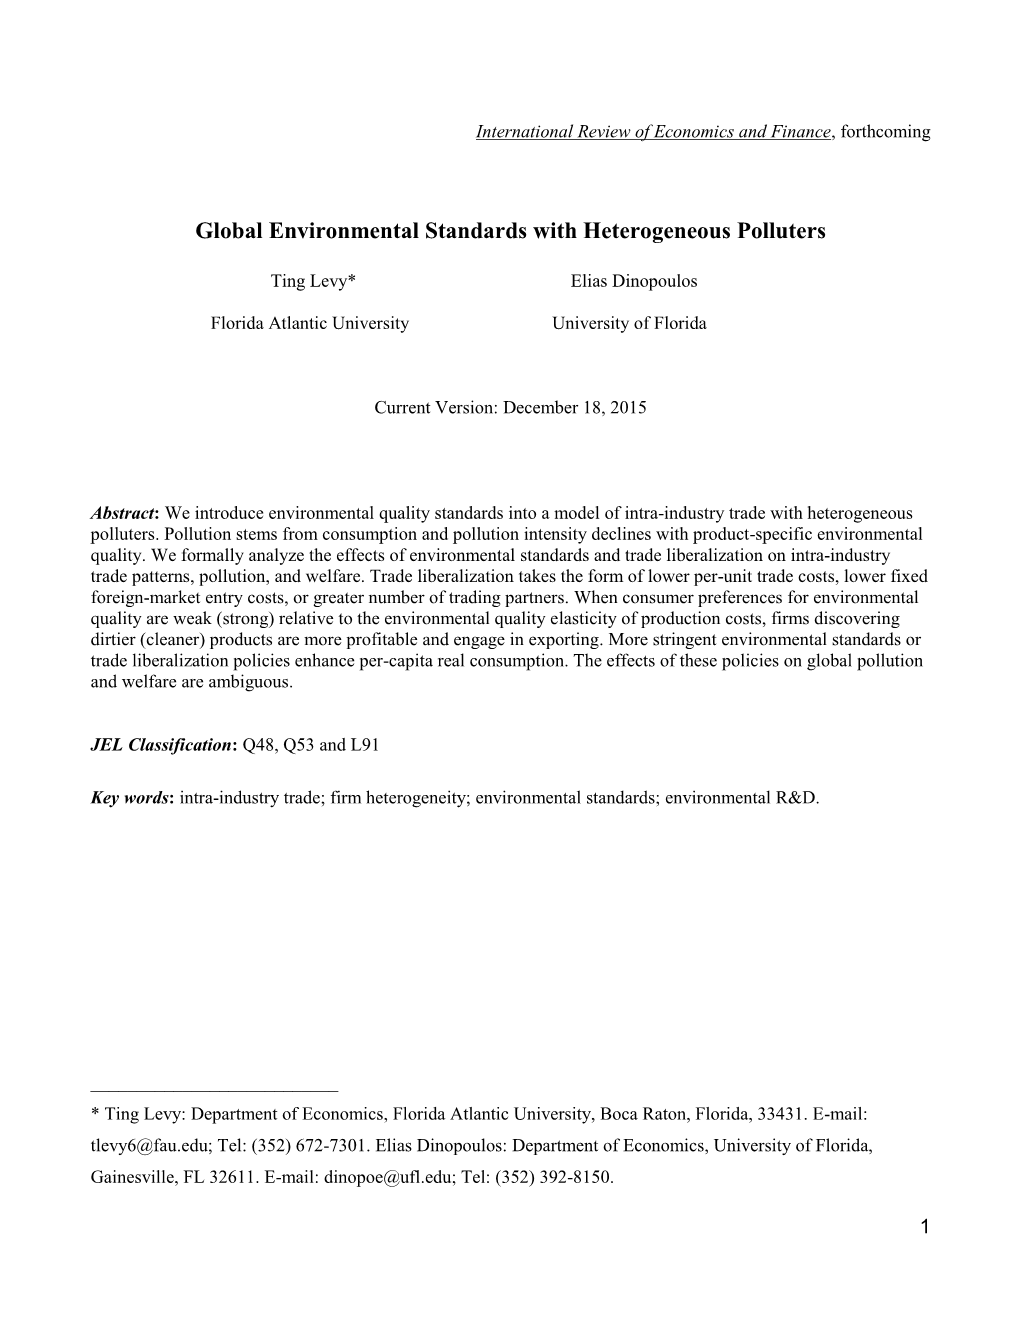 Global Environmental Standards with Heterogeneous Polluters